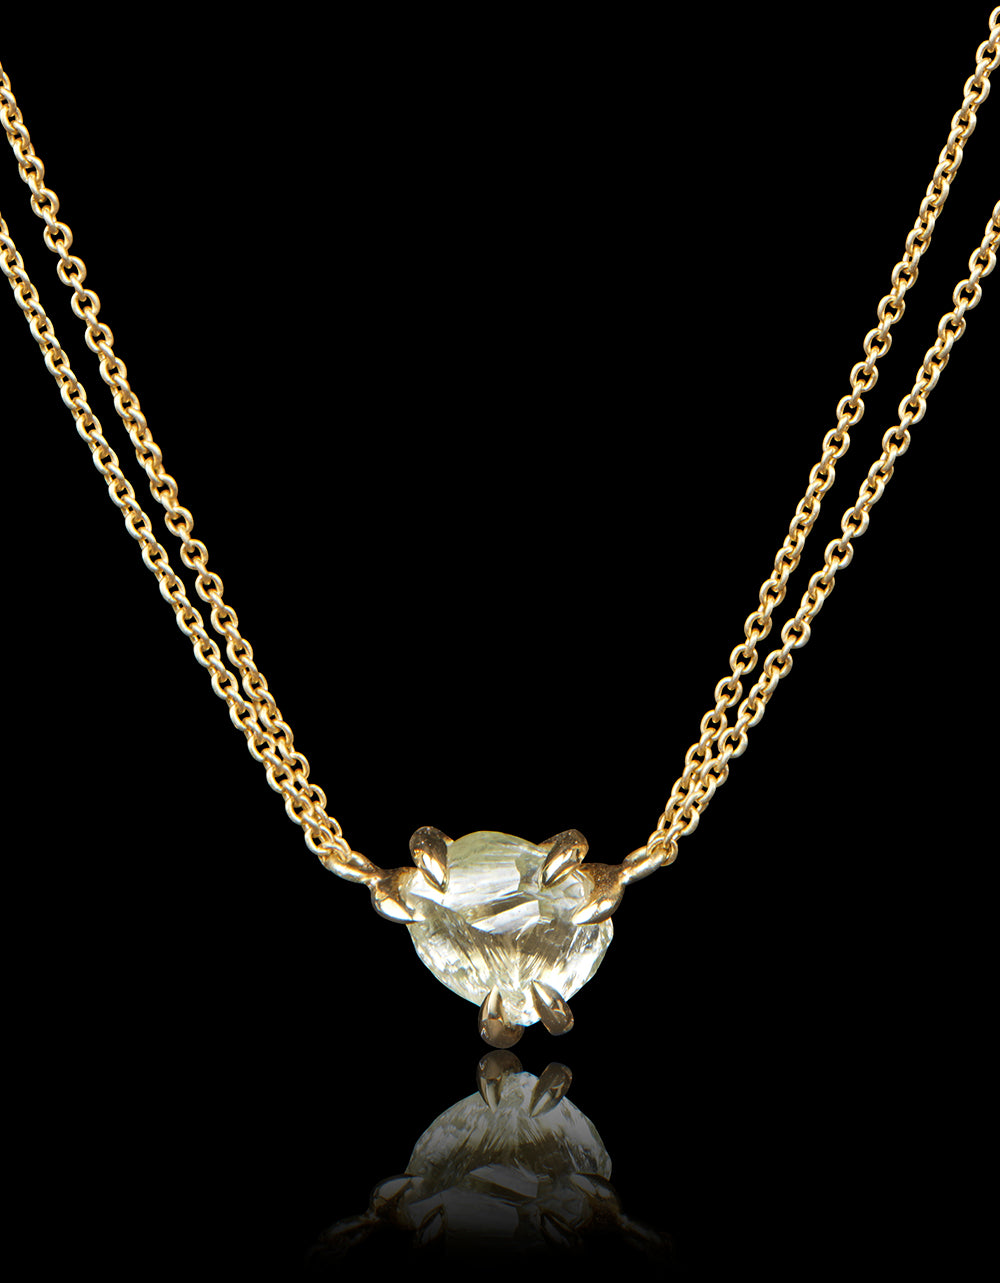 South African Beauty Necklace – 1.80 ct.